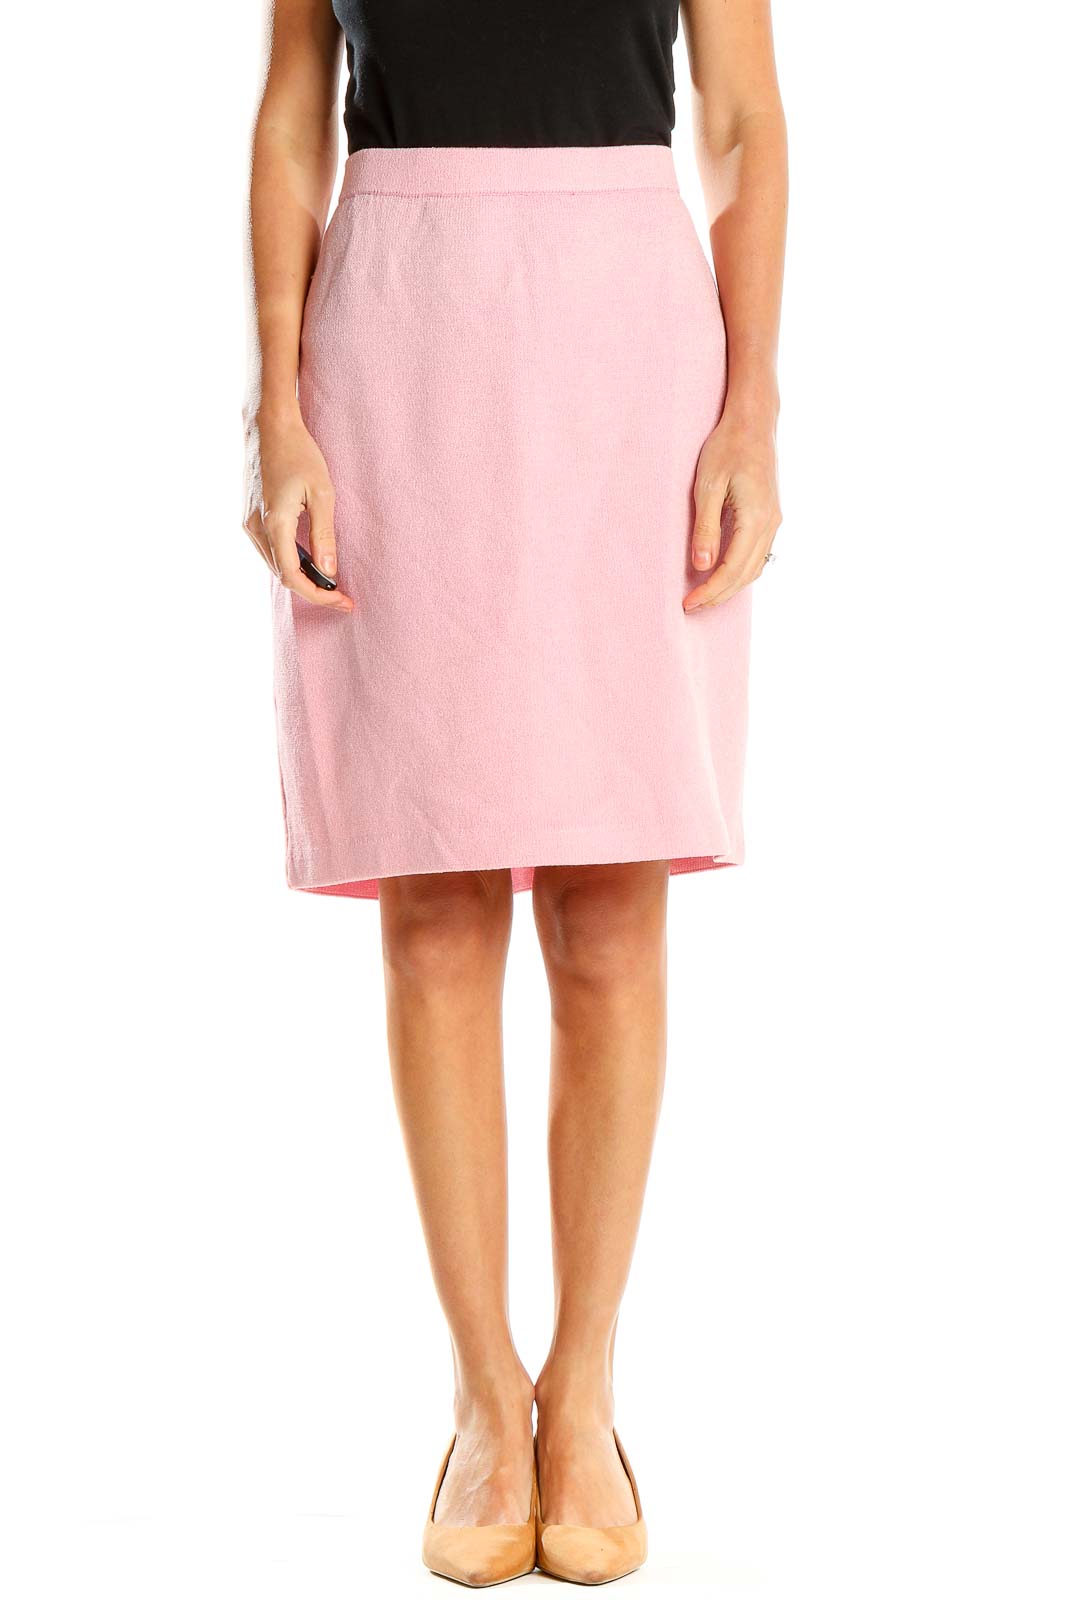 Pink Chic Pencil Skirt Front